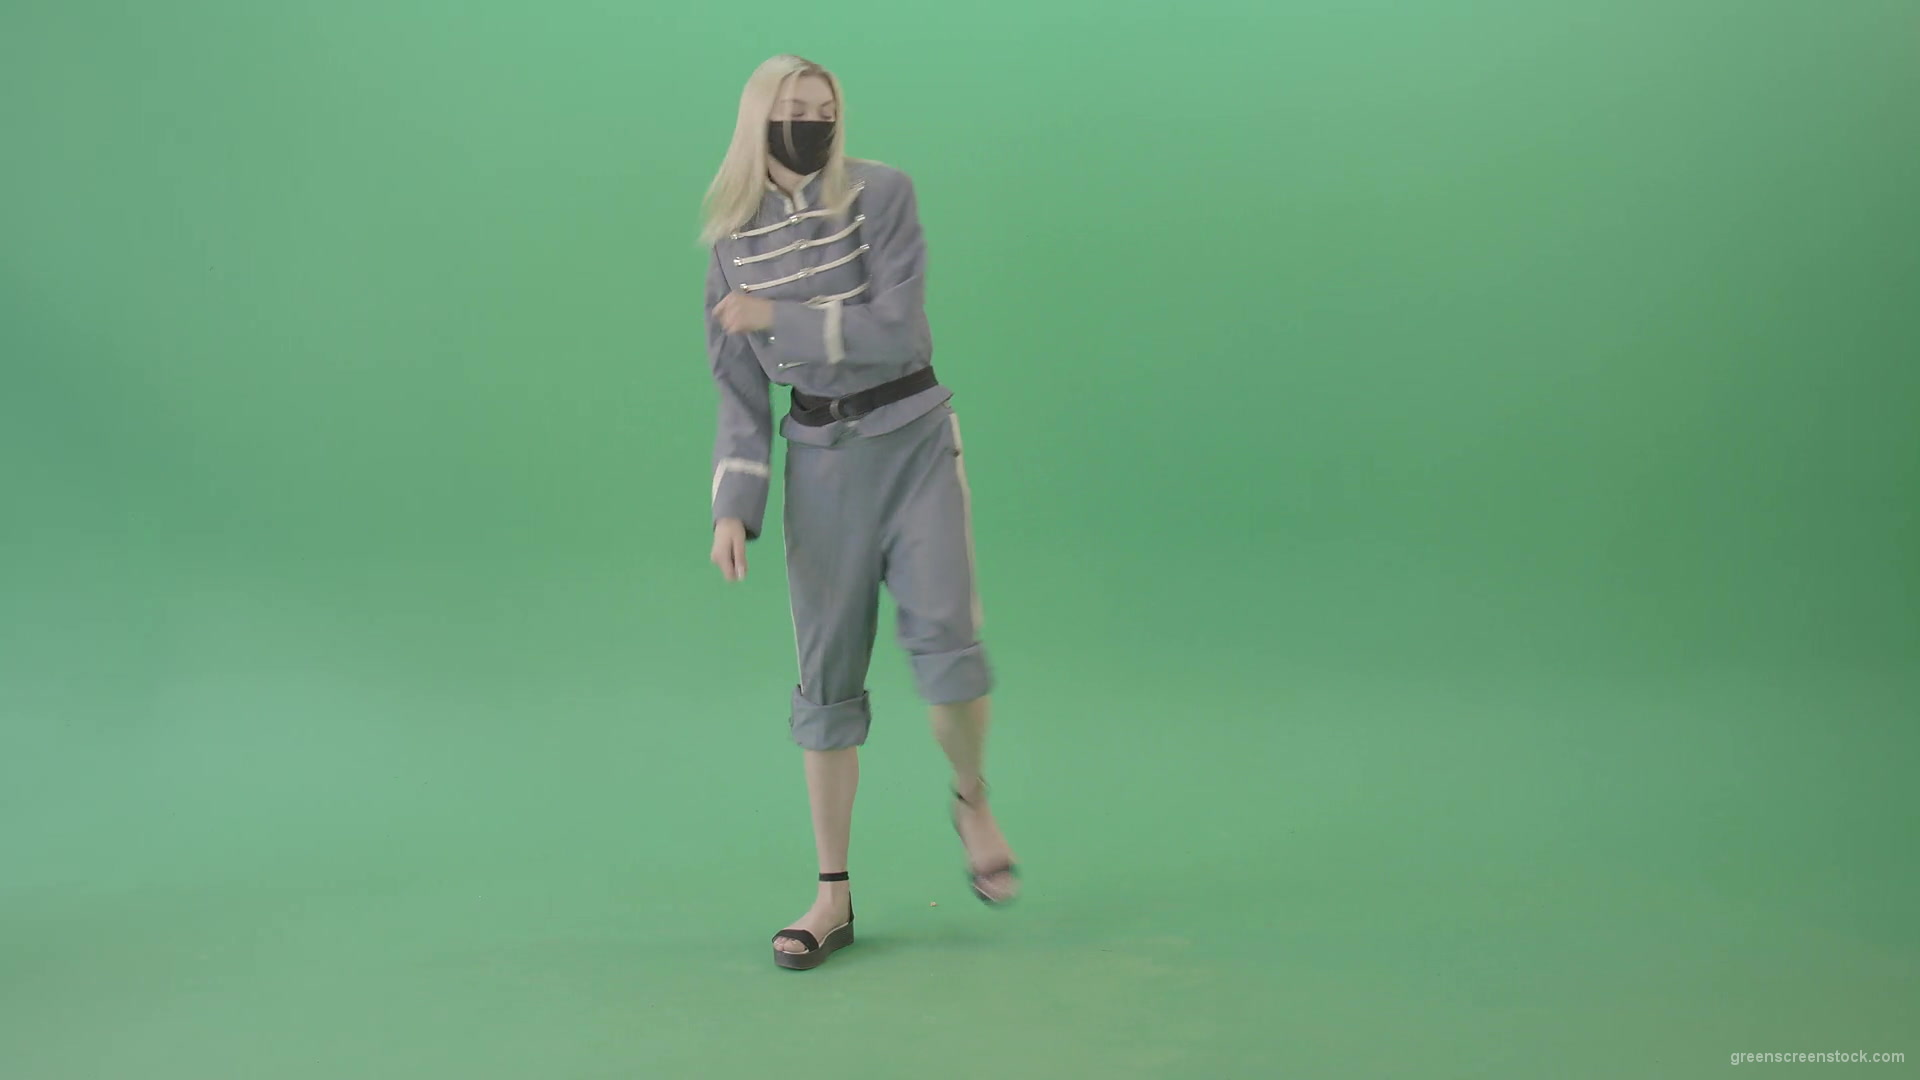 Blondie-in-Techno-royal-costume-dancing-house-in-black-covid19-mask-on-green-screen-4K-Video-Footage-1920_002 Green Screen Stock